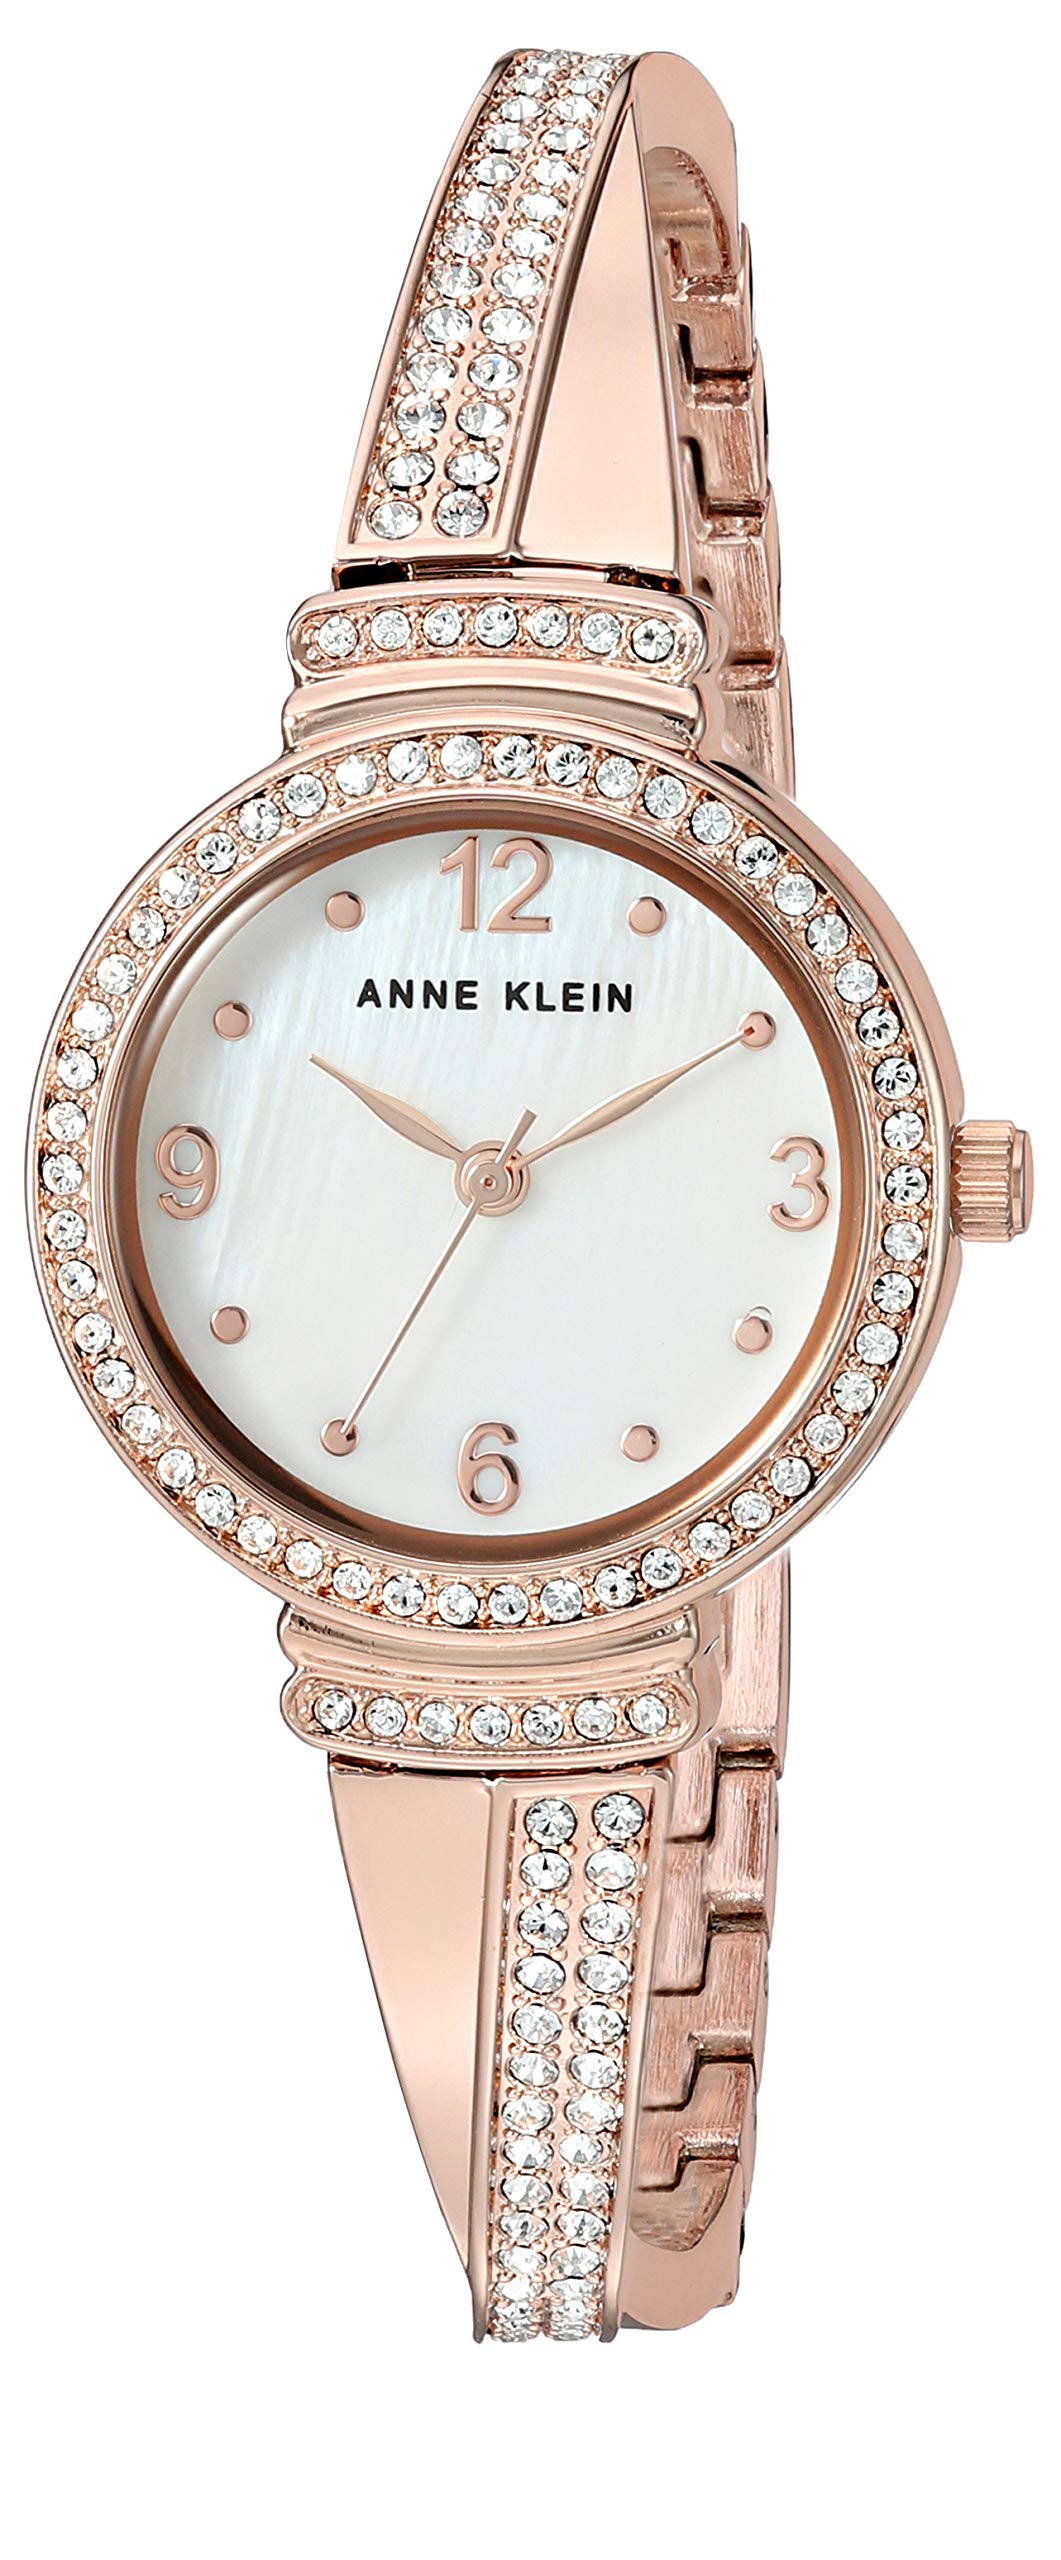 Anne Klein Women's AK/3256RGST Premium Crystal Accented Rose Gold-Tone Bangle Watch and Bracelet Set